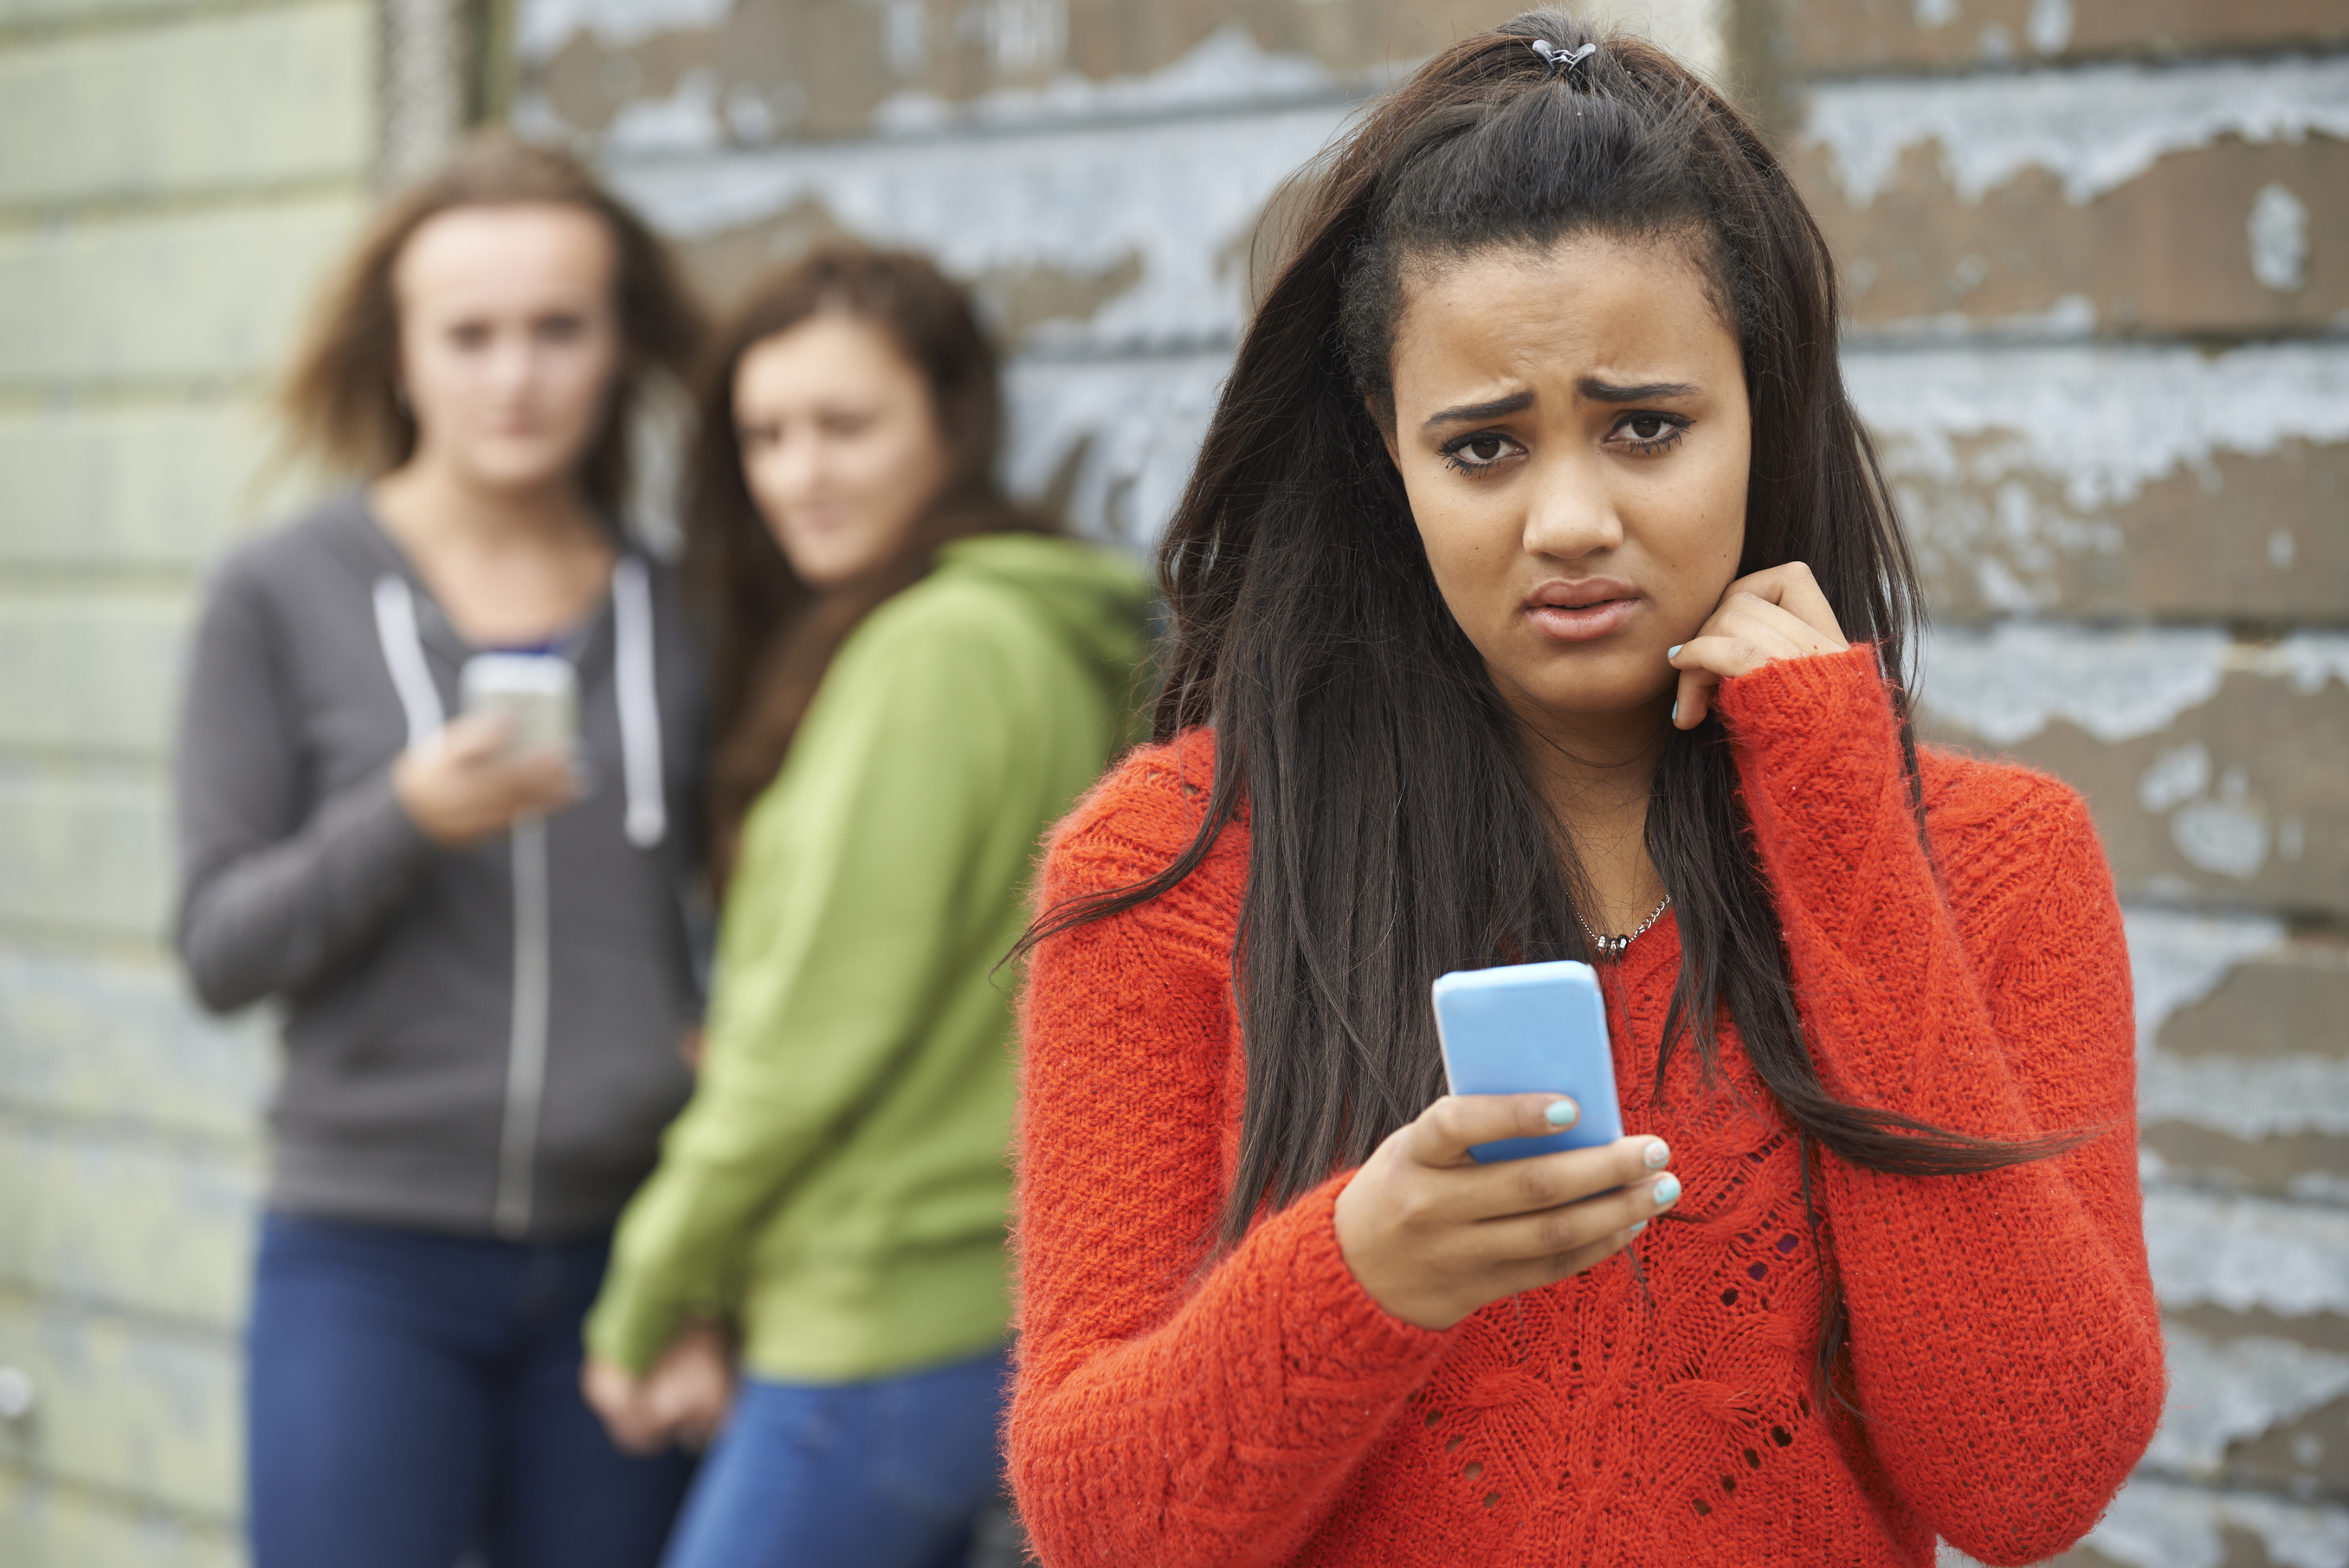 Cyberbullying Linked to Depression and Addiction in Teens